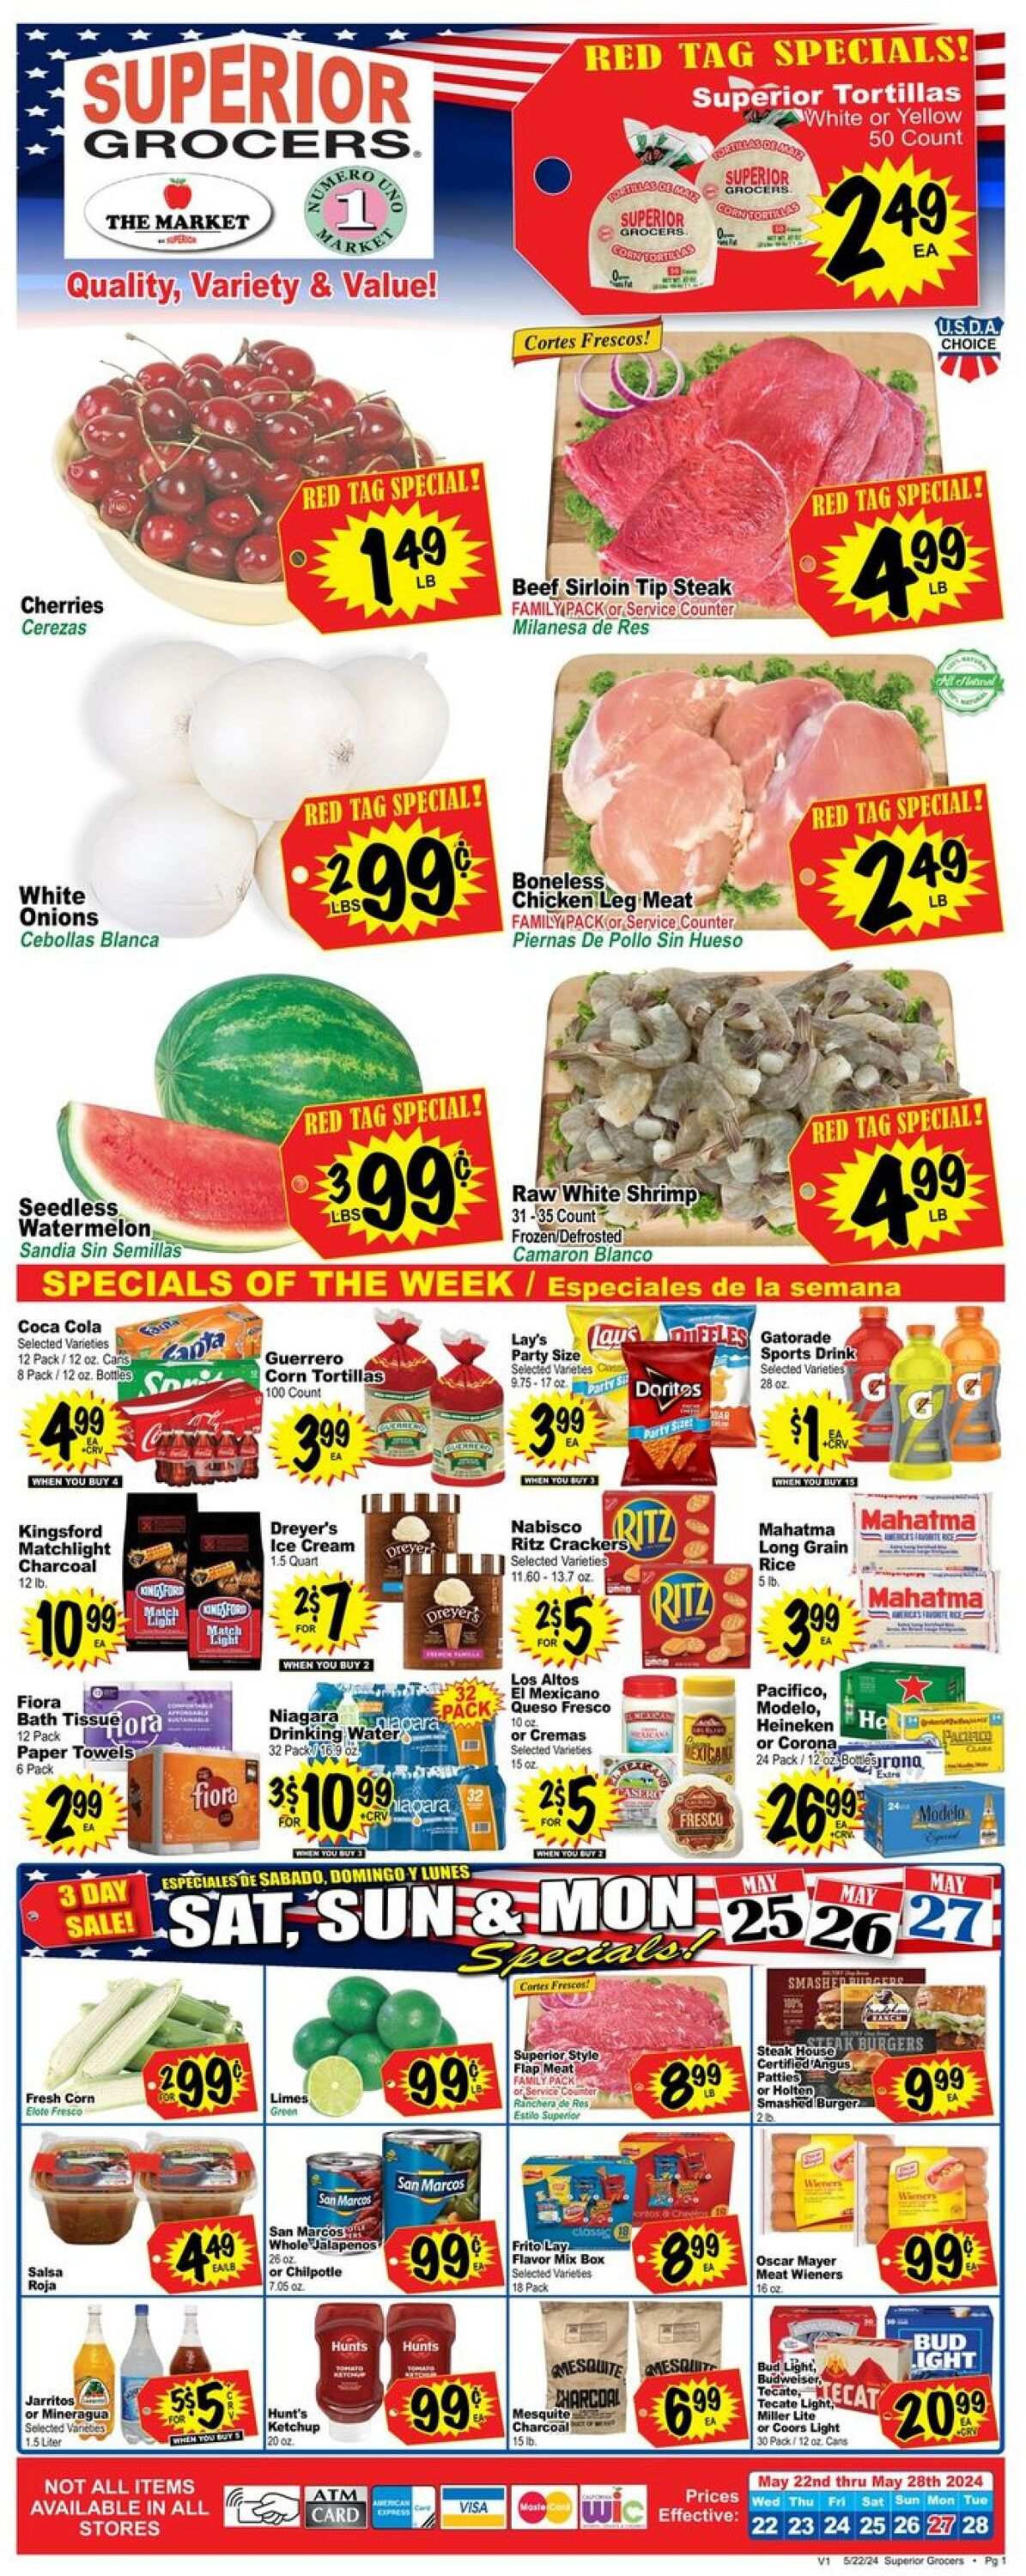 Superior Grocers Promotional weekly ads